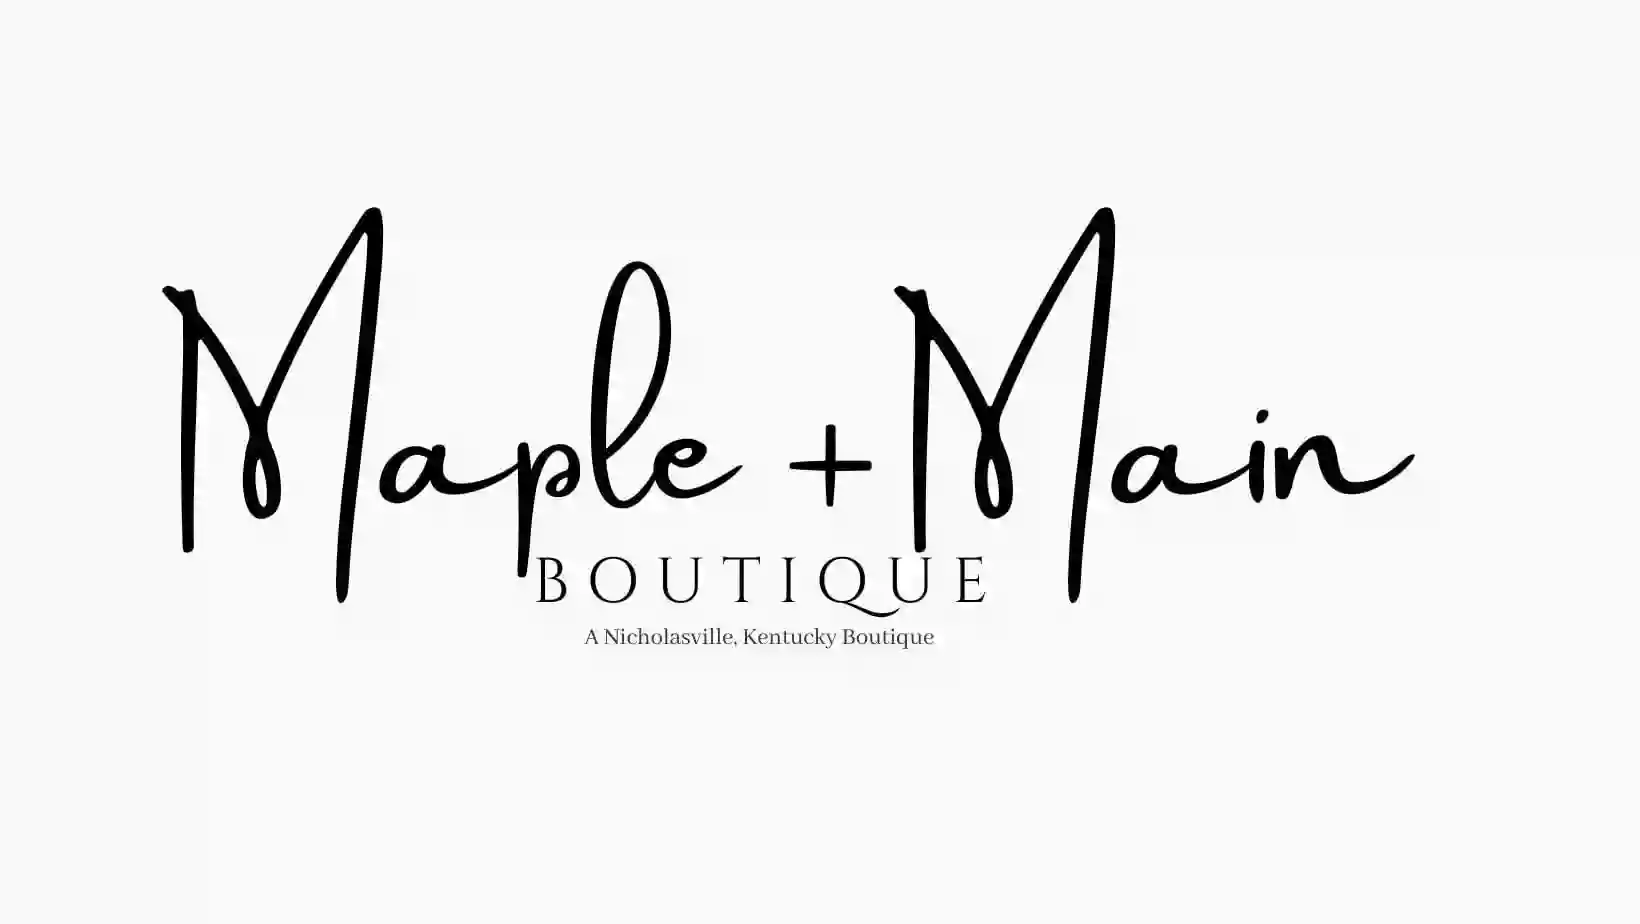 Boutique on Maple at 721